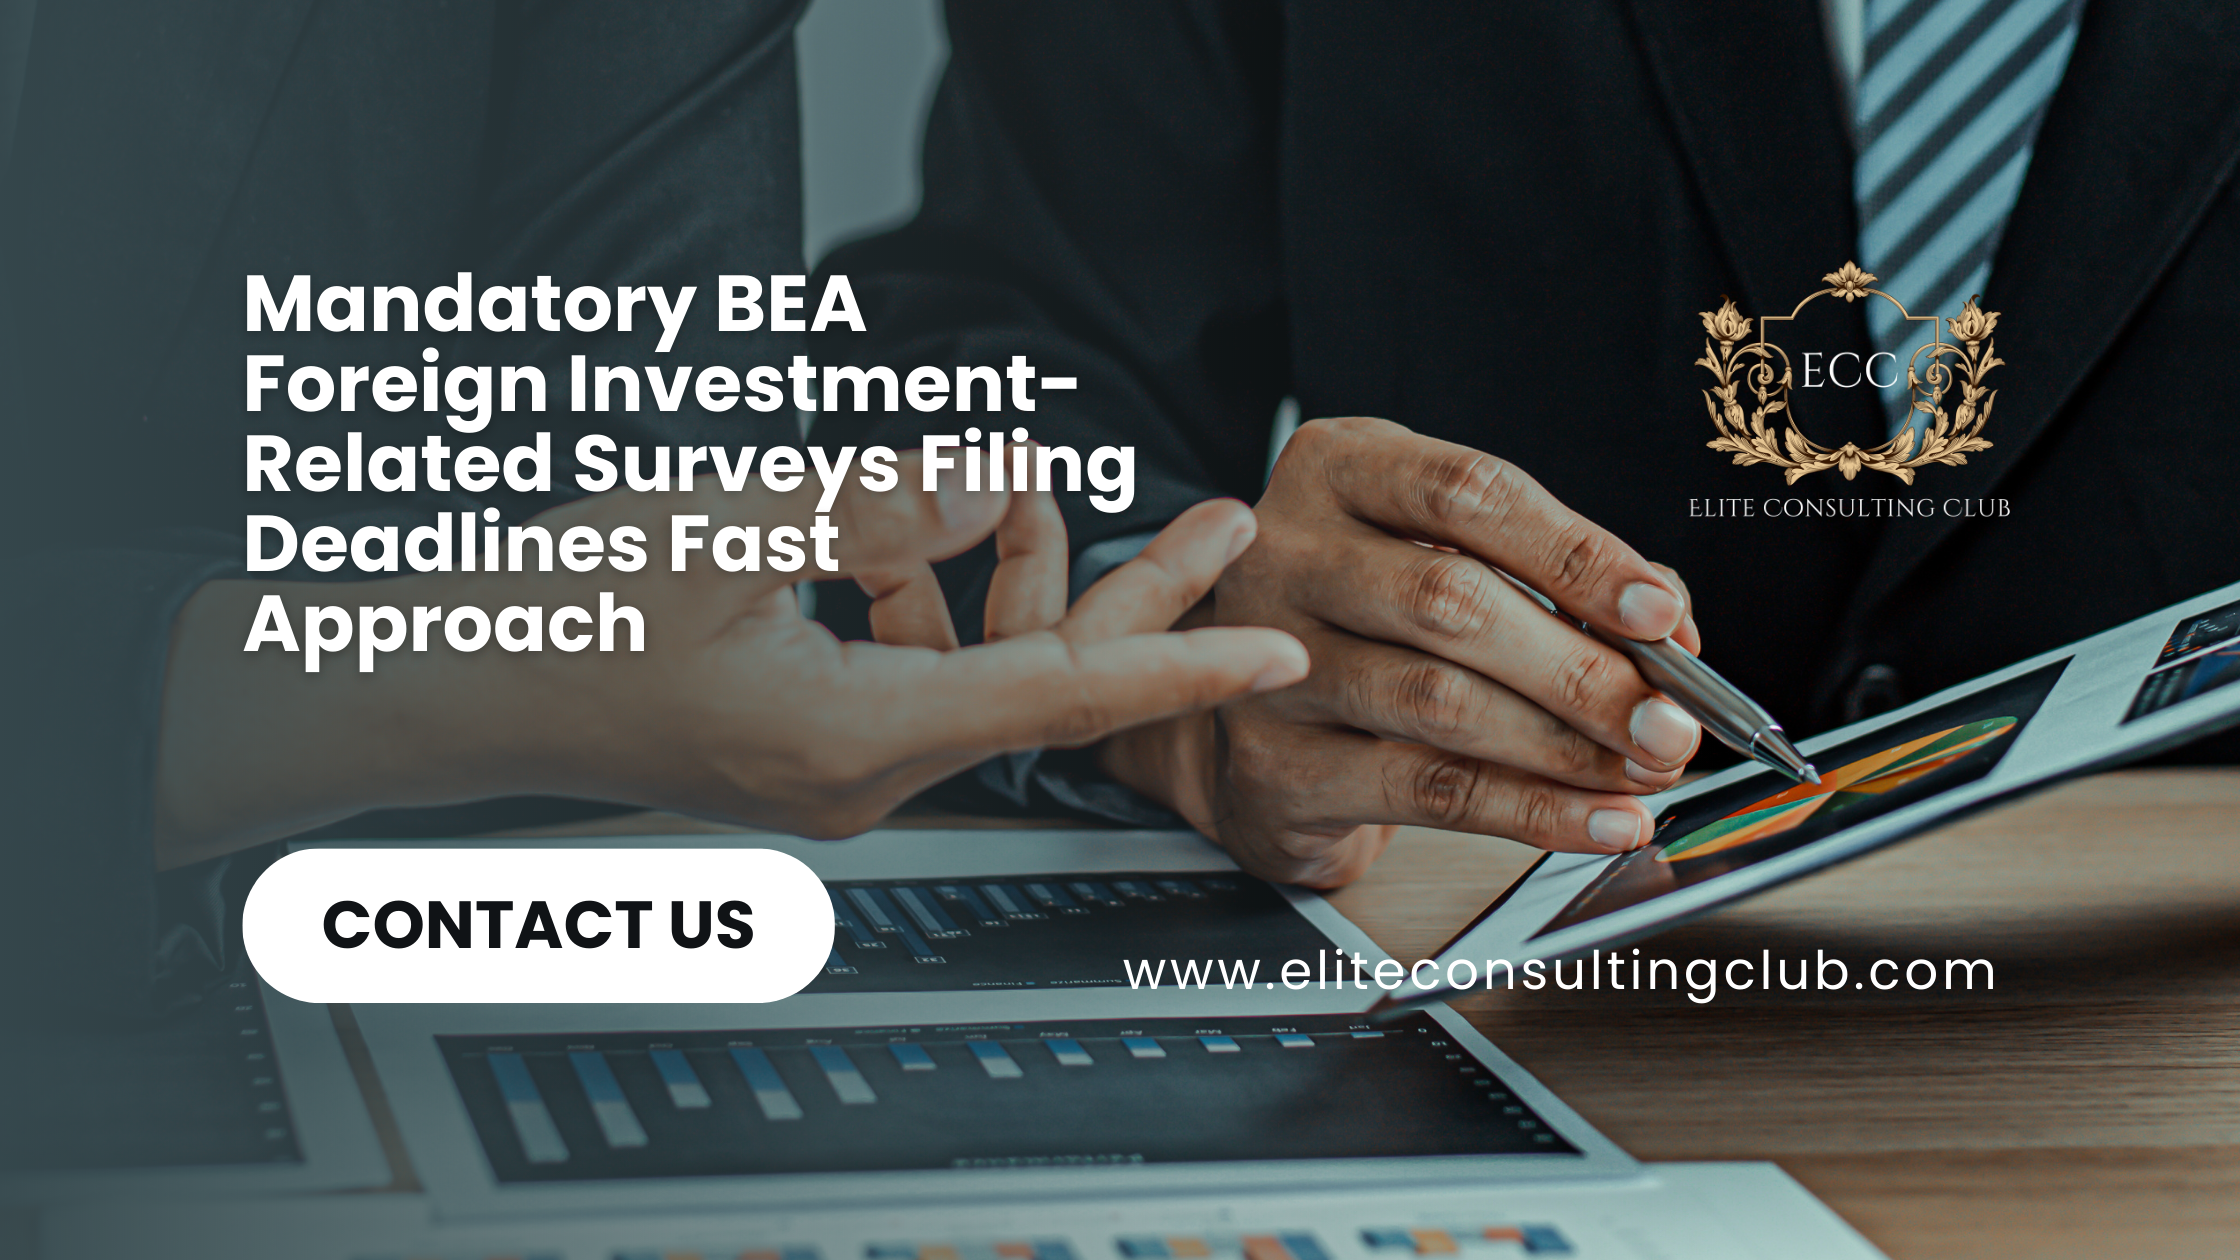 Mandatory-BEA-Foreign-Investment-Related-Surveys-Filing-Deadlines-Fast-Approach